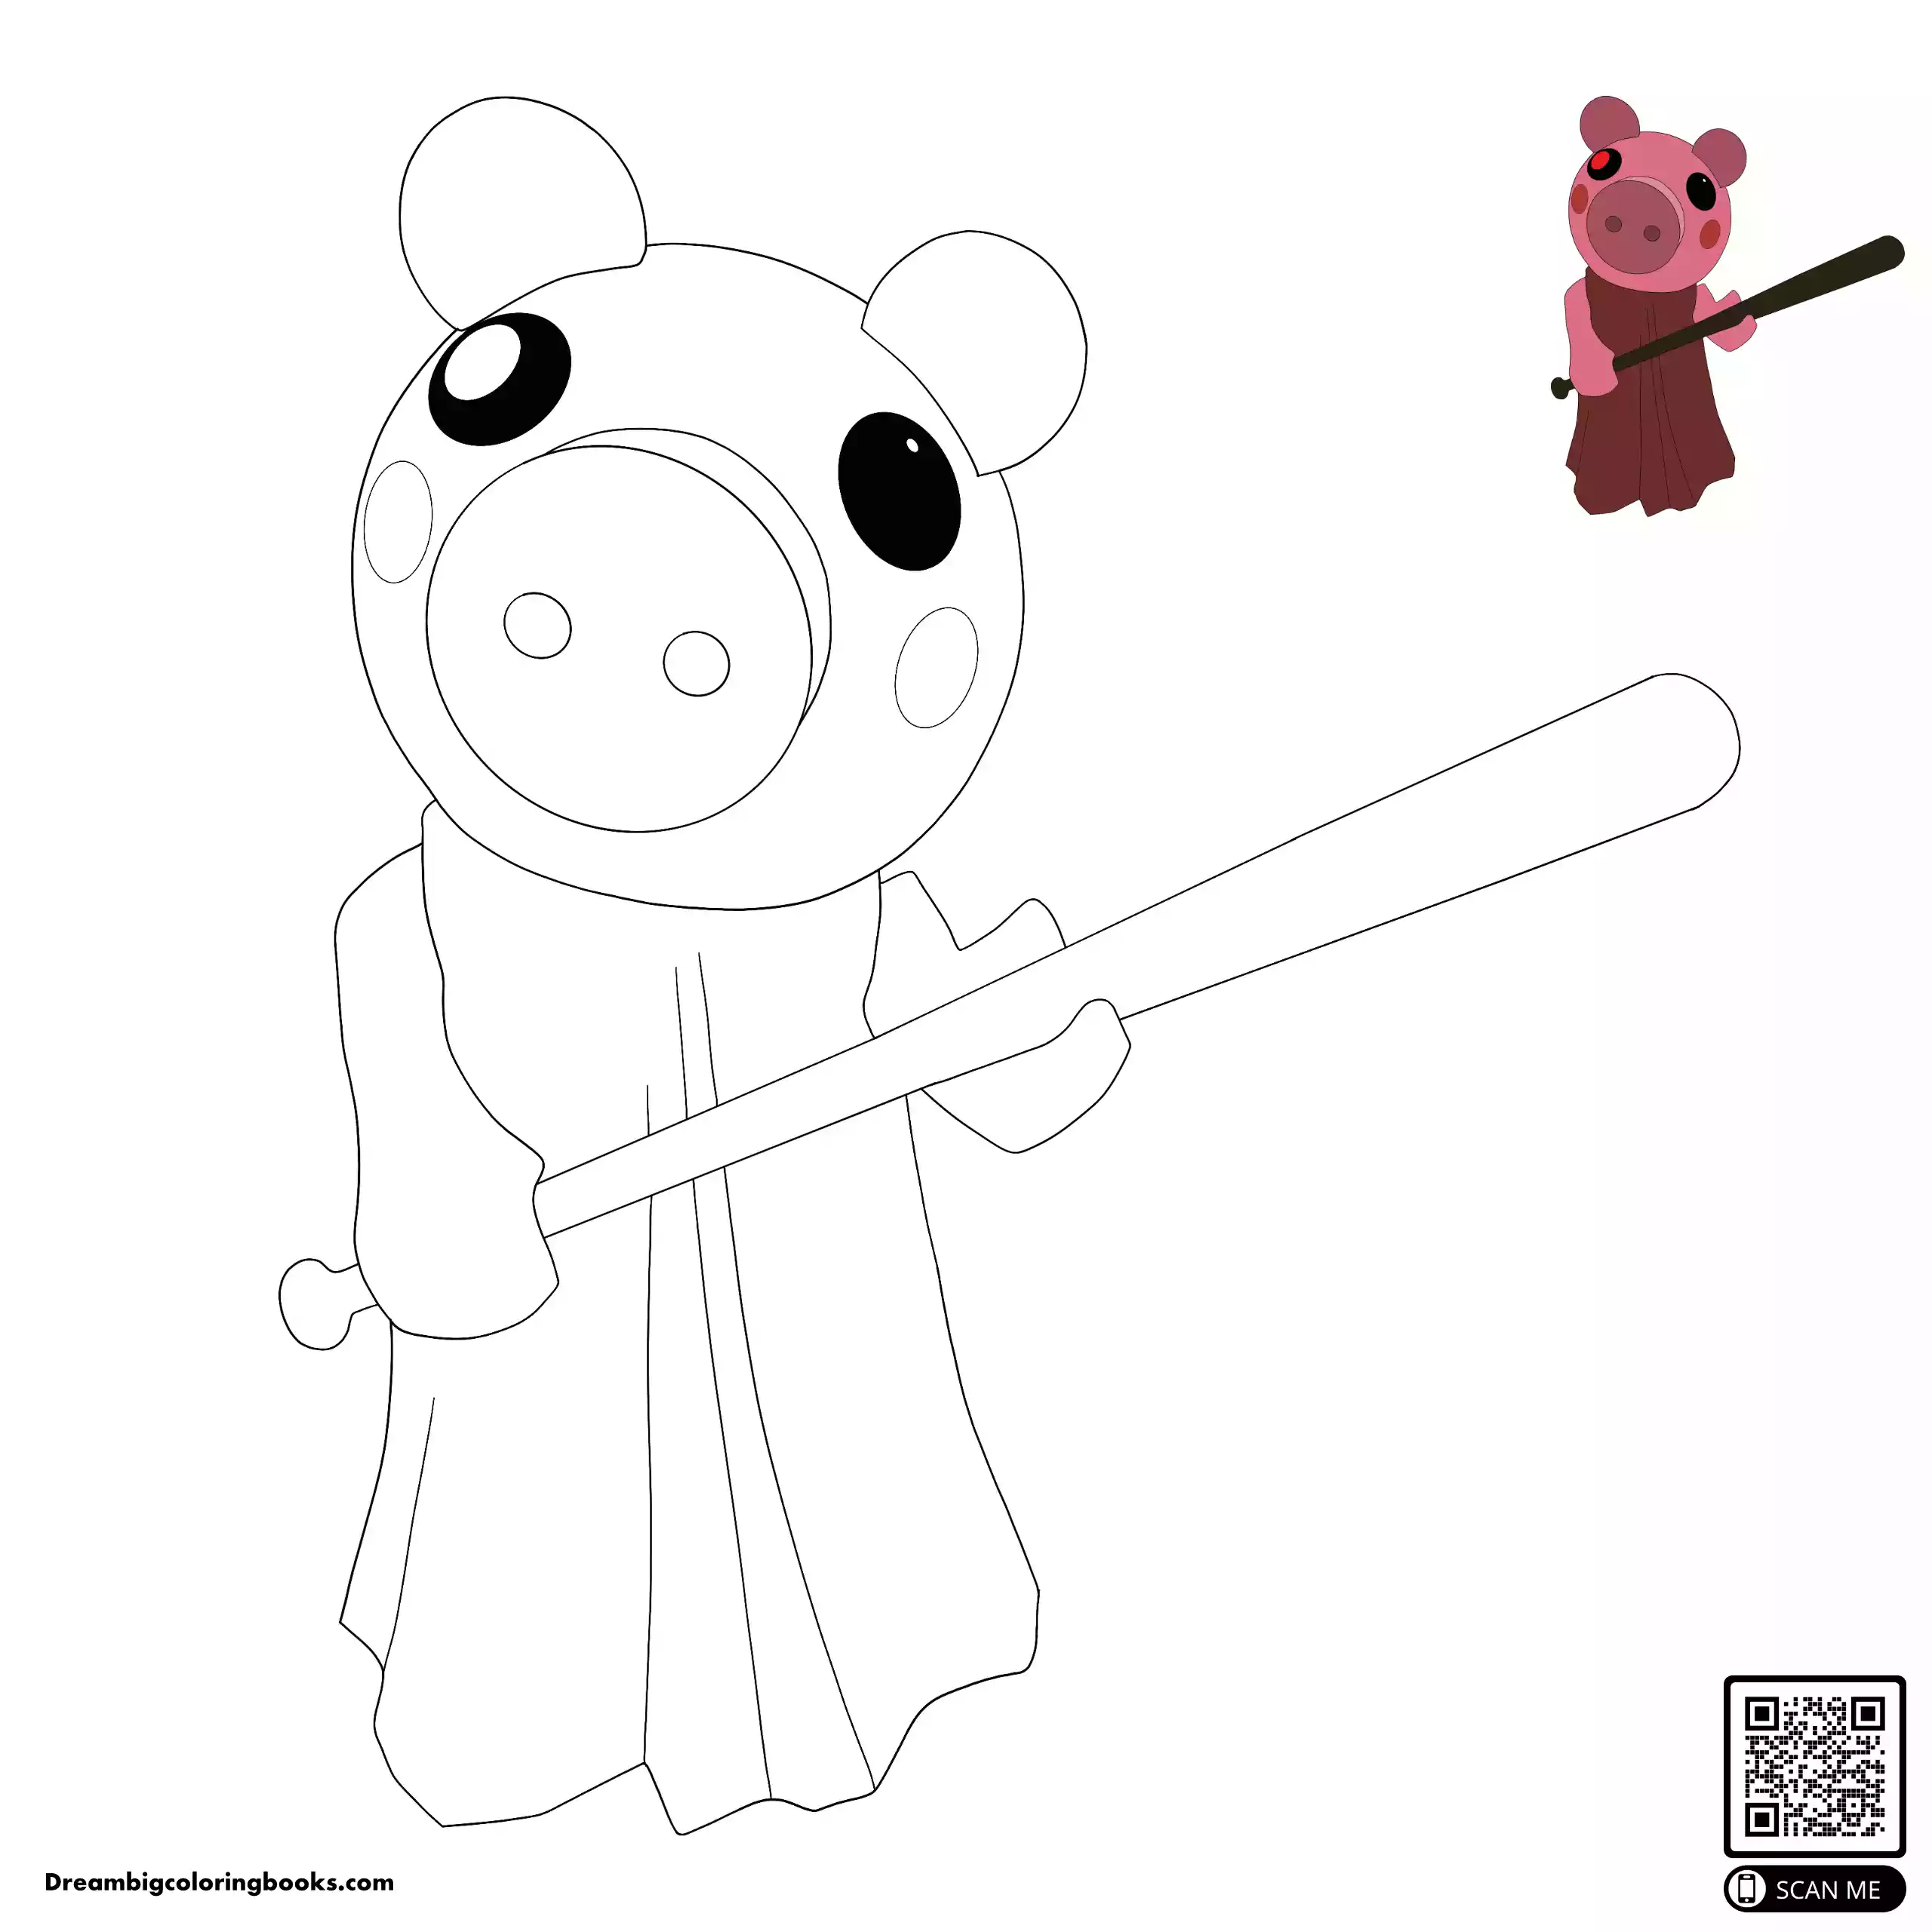 Roblox Piggy coloring page with preview